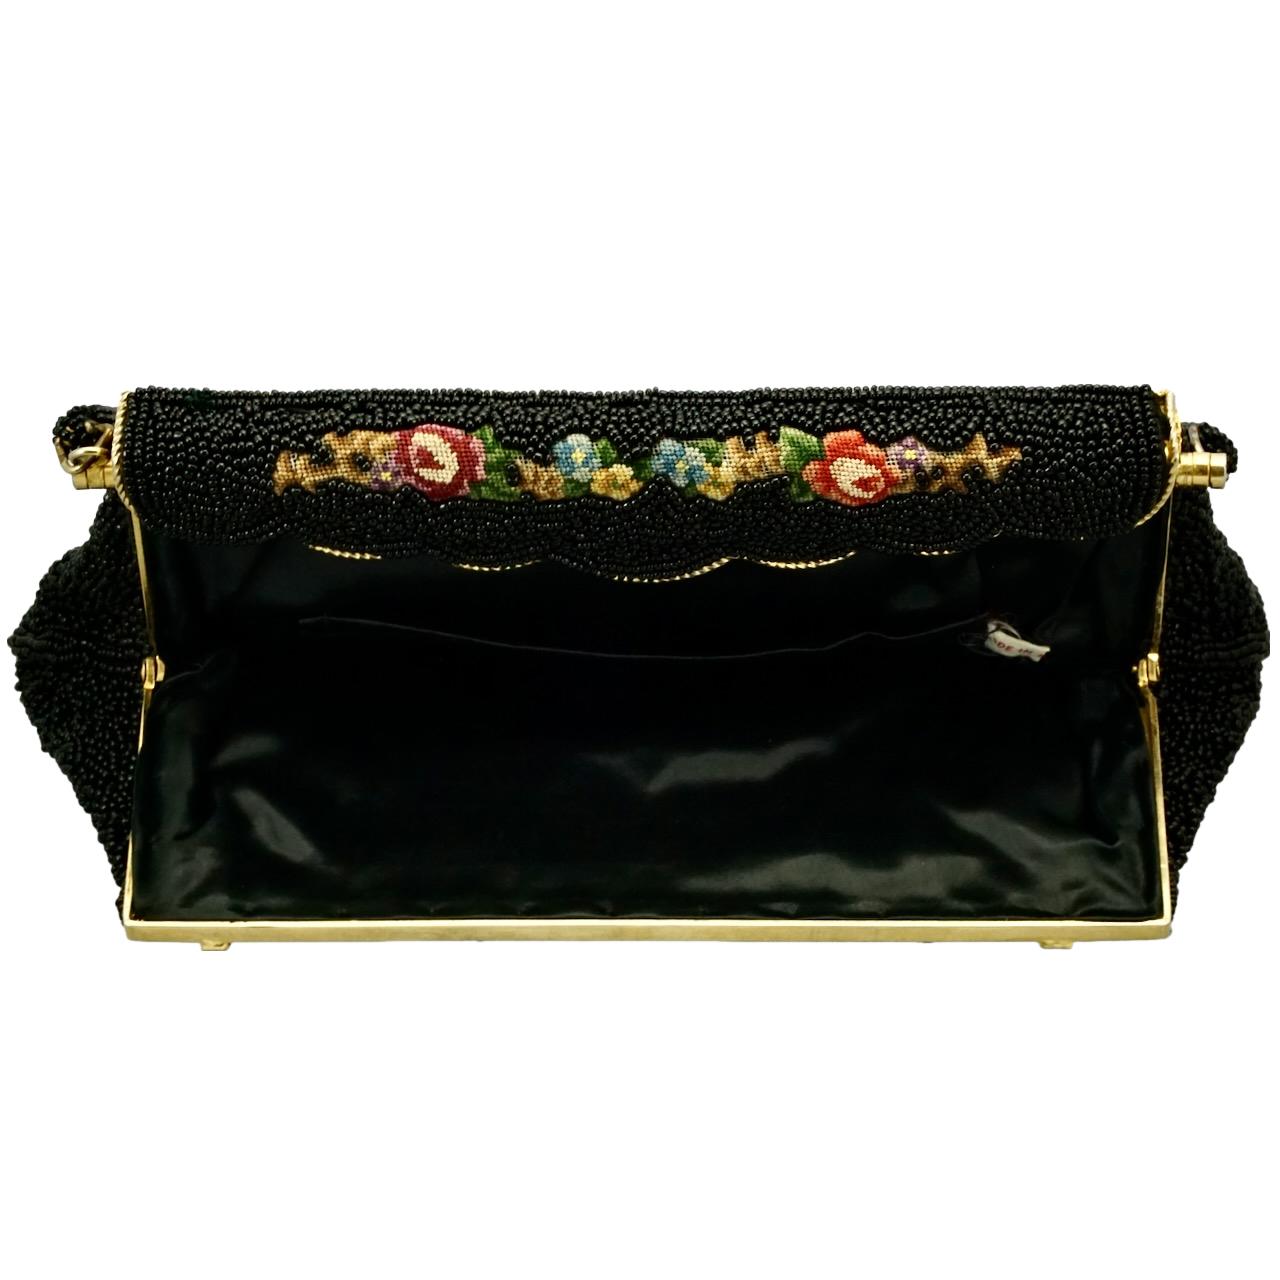 Black Beaded and Floral Tapestry Embroidered Handbag circa 1950s For Sale 2